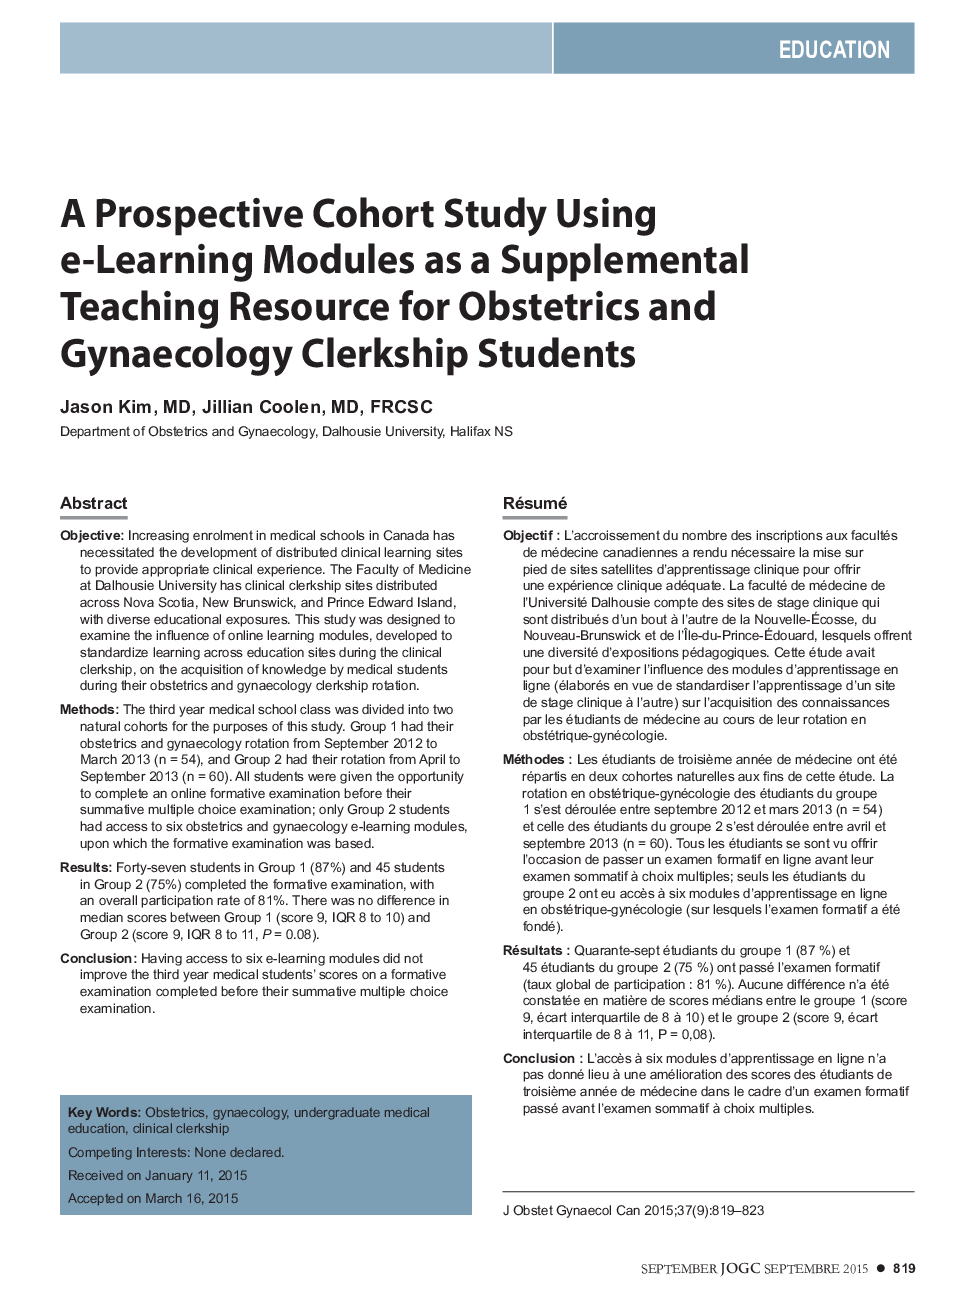 A Prospective Cohort Study Using e-Learning Modules as a Supplemental Teaching Resource for Obstetrics and Gynaecology Clerkship Students